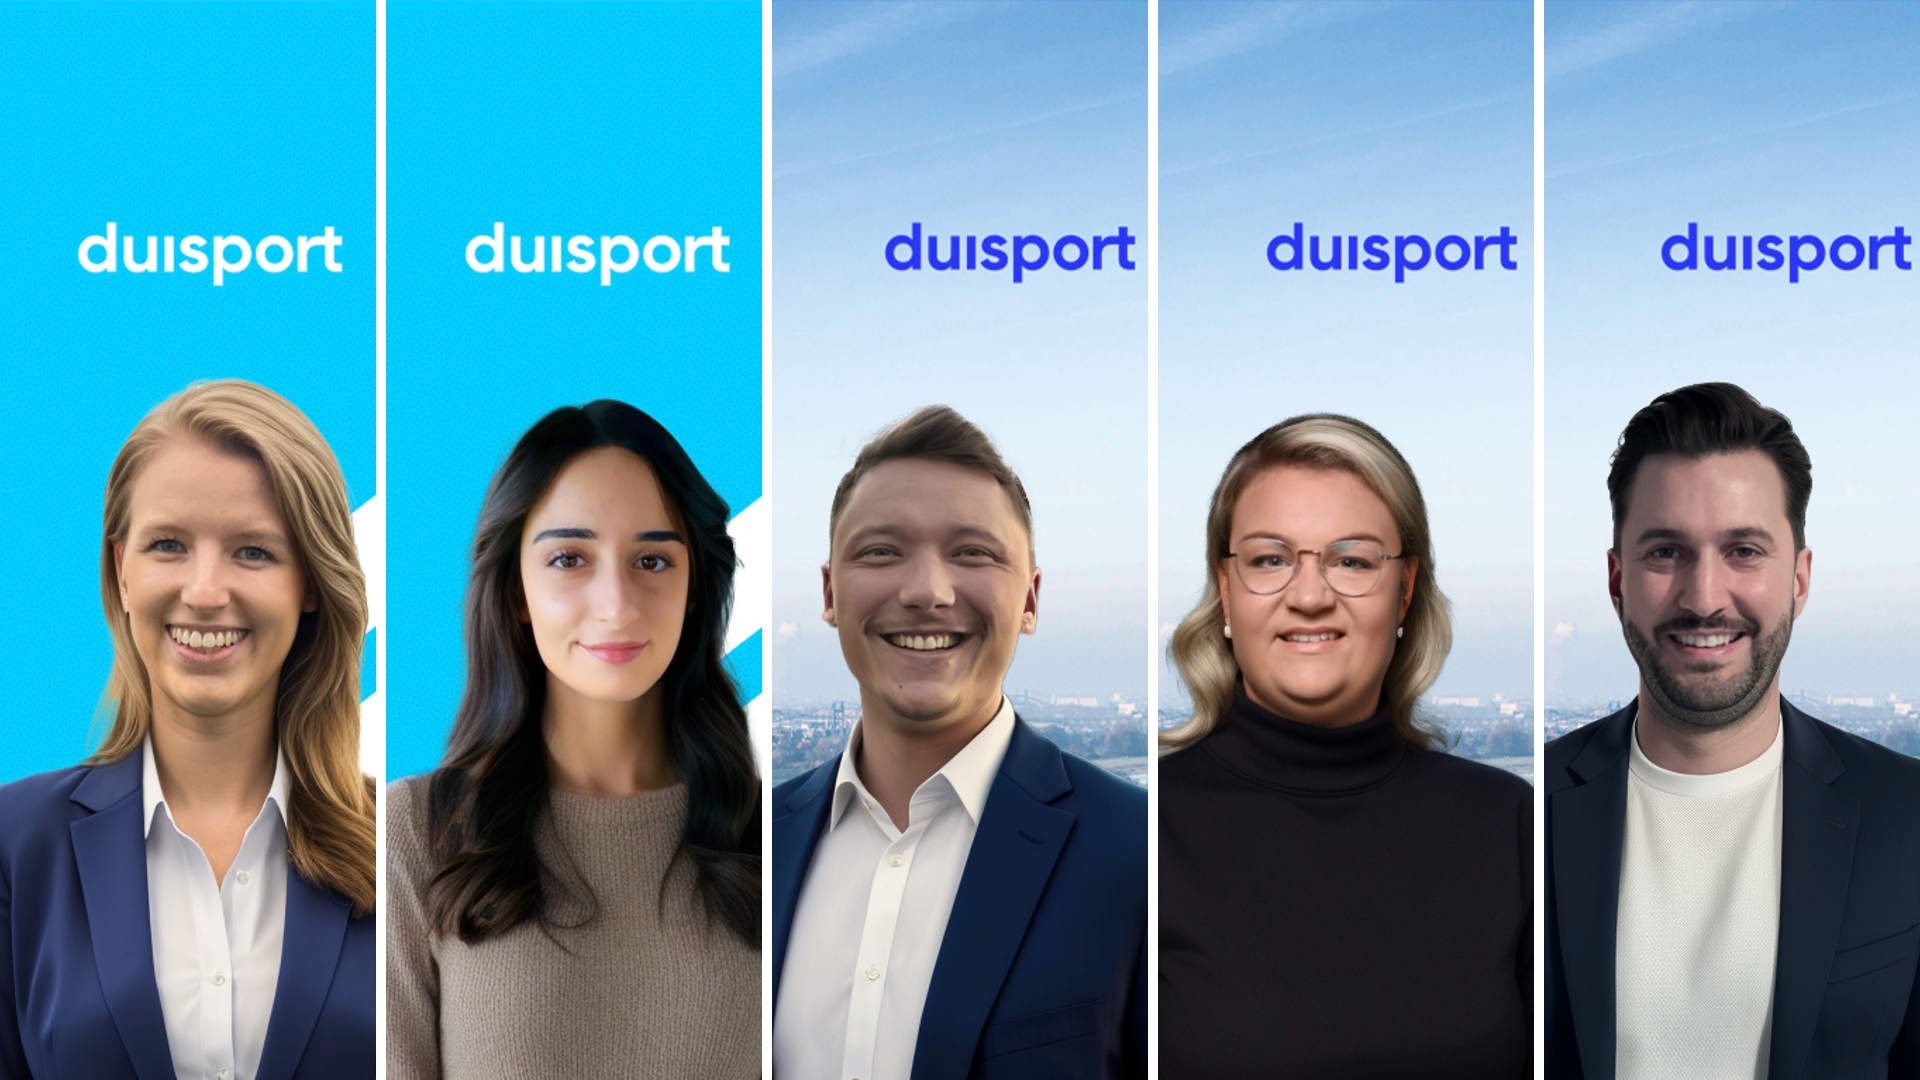 duisport photo collage